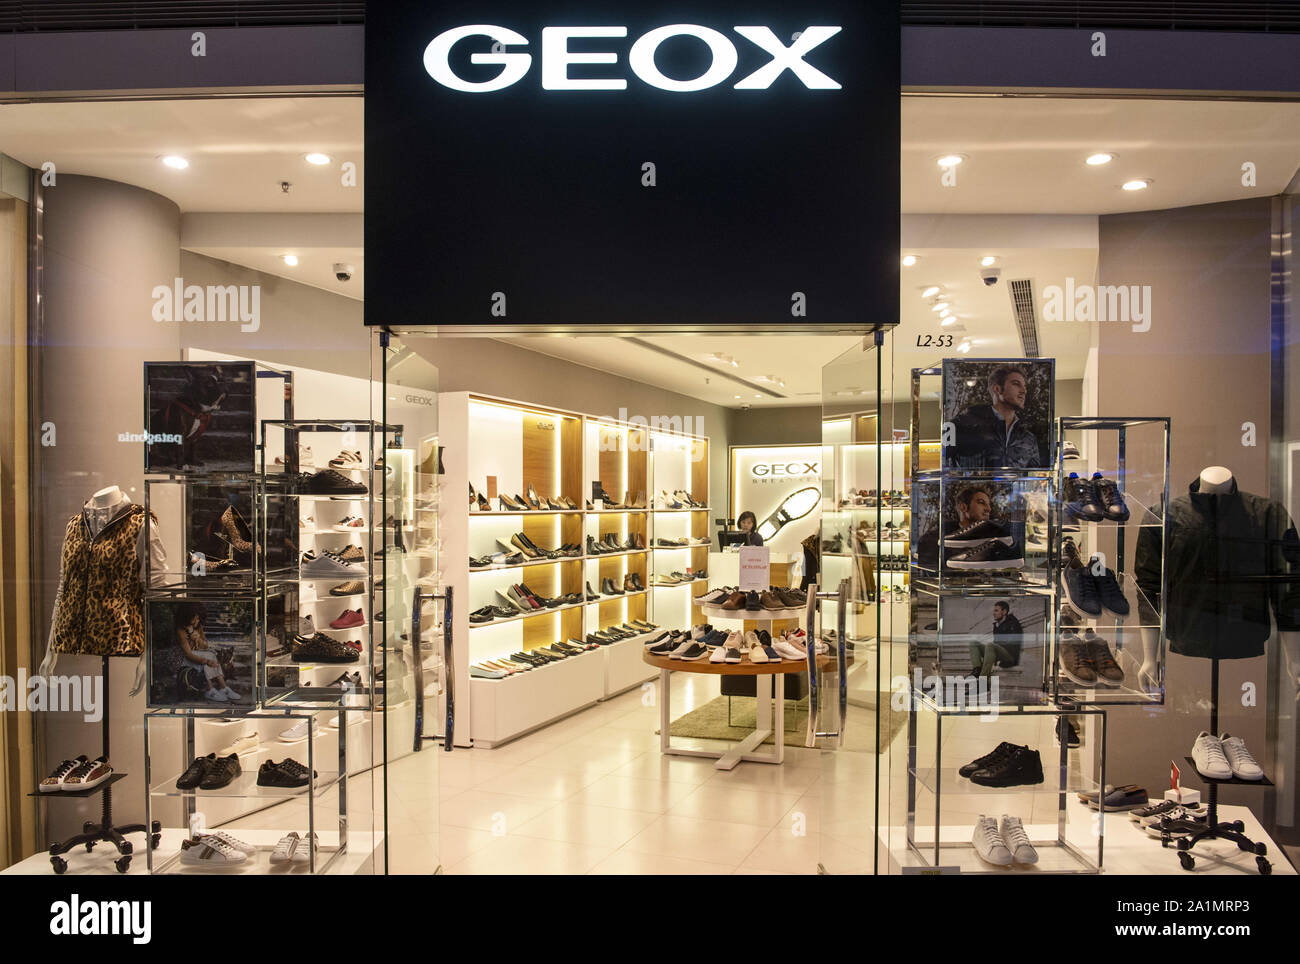 Page 3 - Geox High Resolution Stock Photography and Images - Alamy